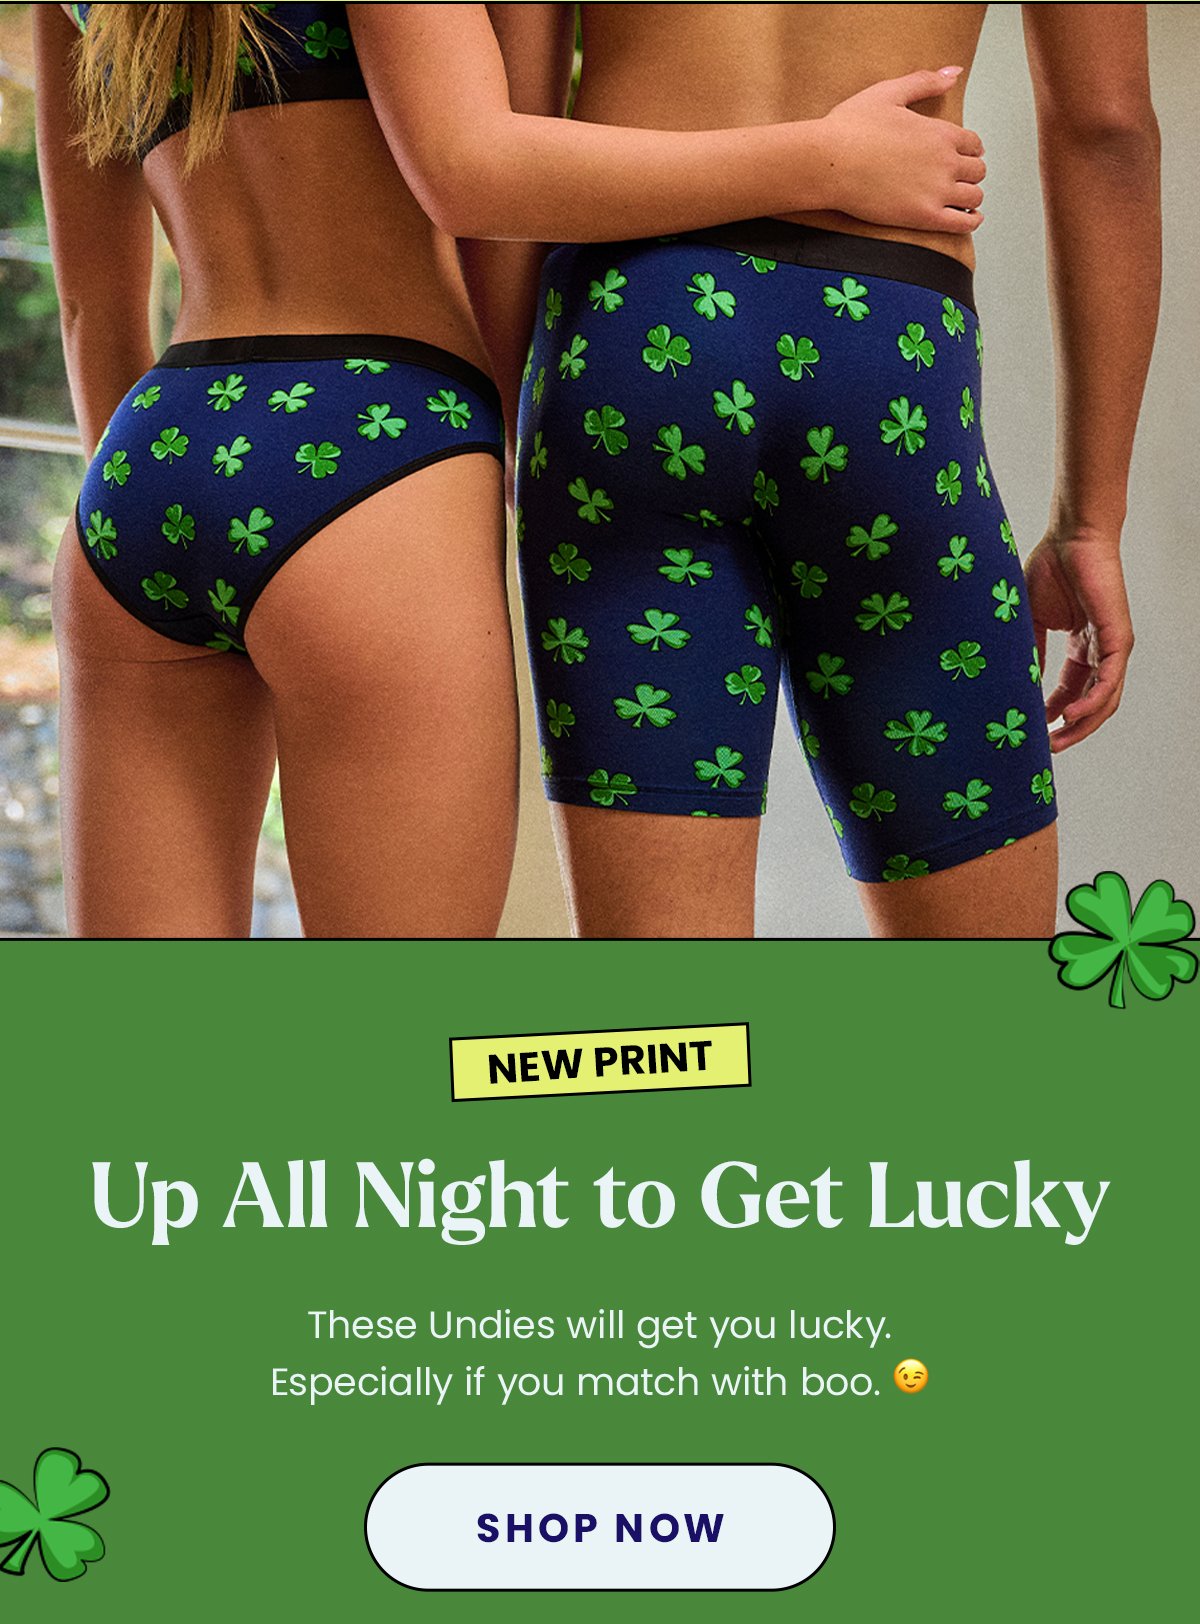 MeUndies Discounts and Cash Back for Everyone